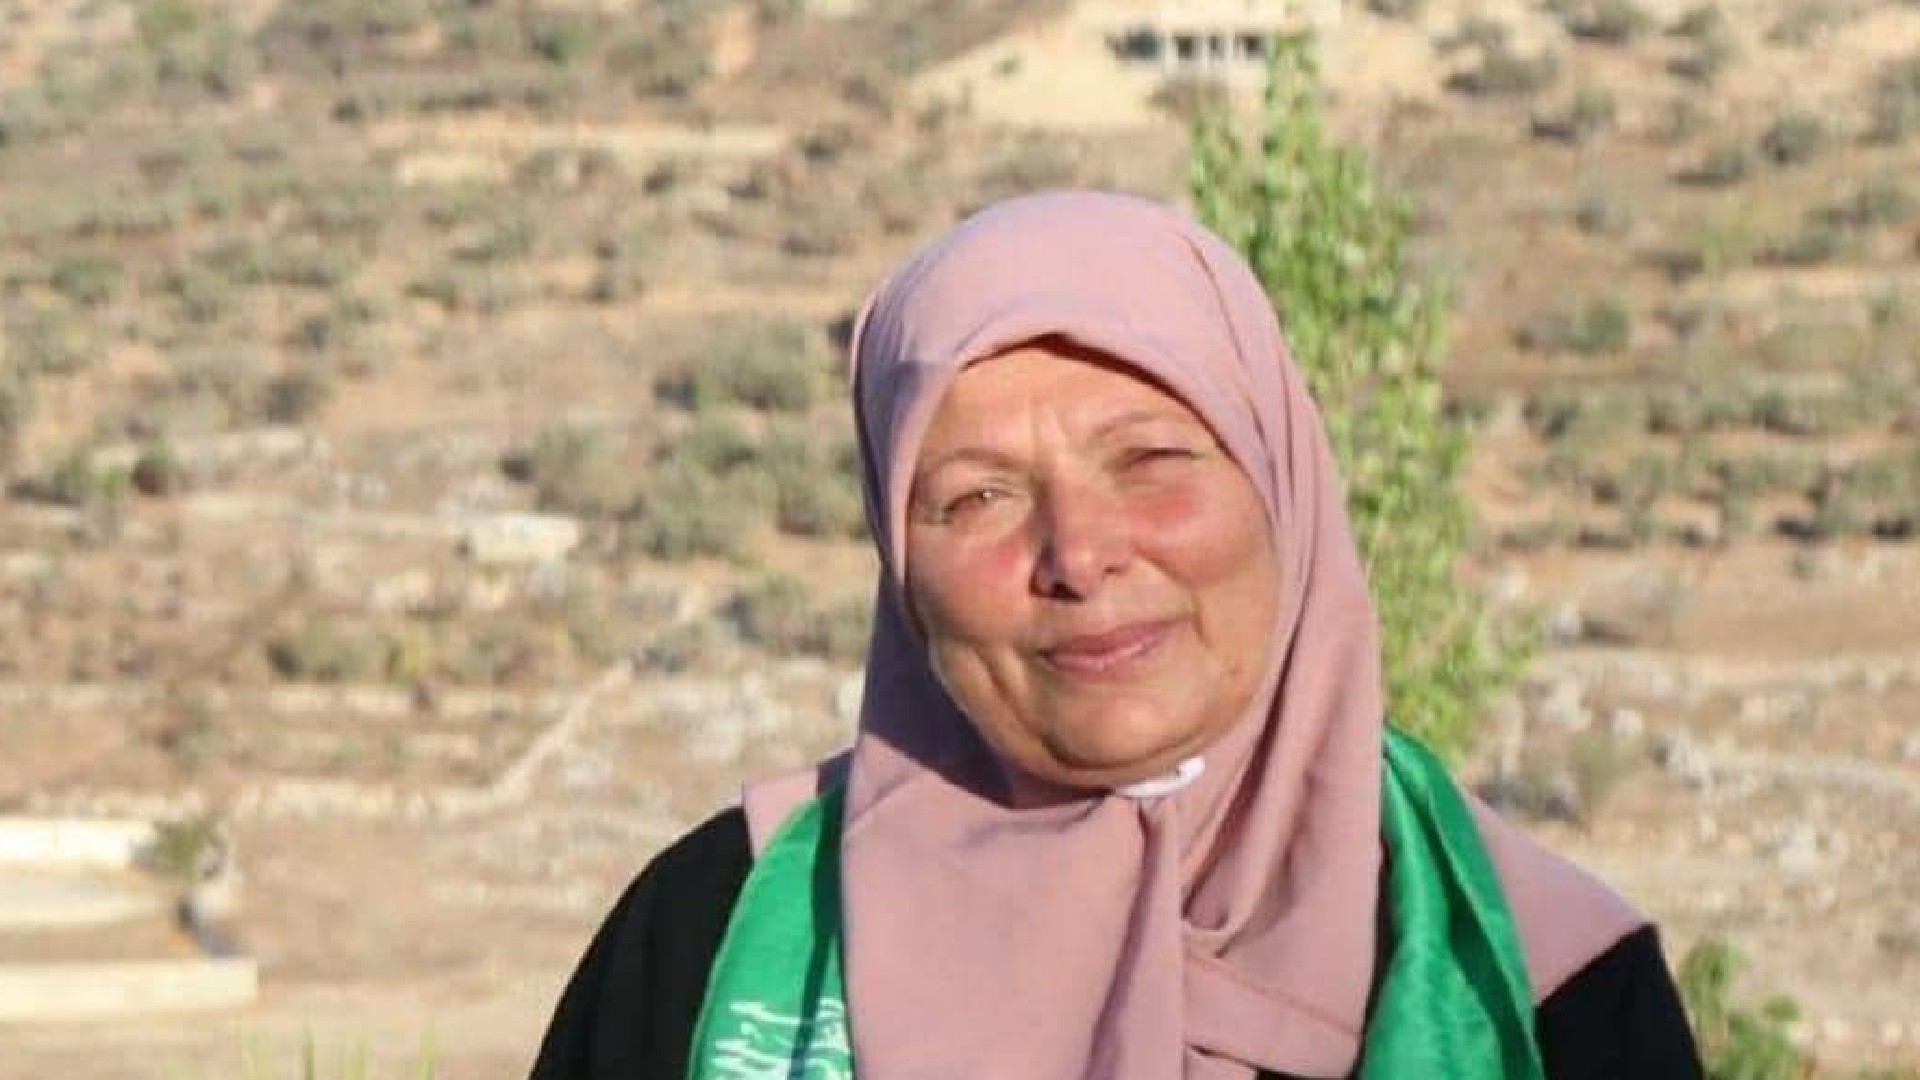 Hanan Barghouti, 59, is set to be released from Israeli jail as part of a prisoner exchange deal between Israel and Palestinians (X)